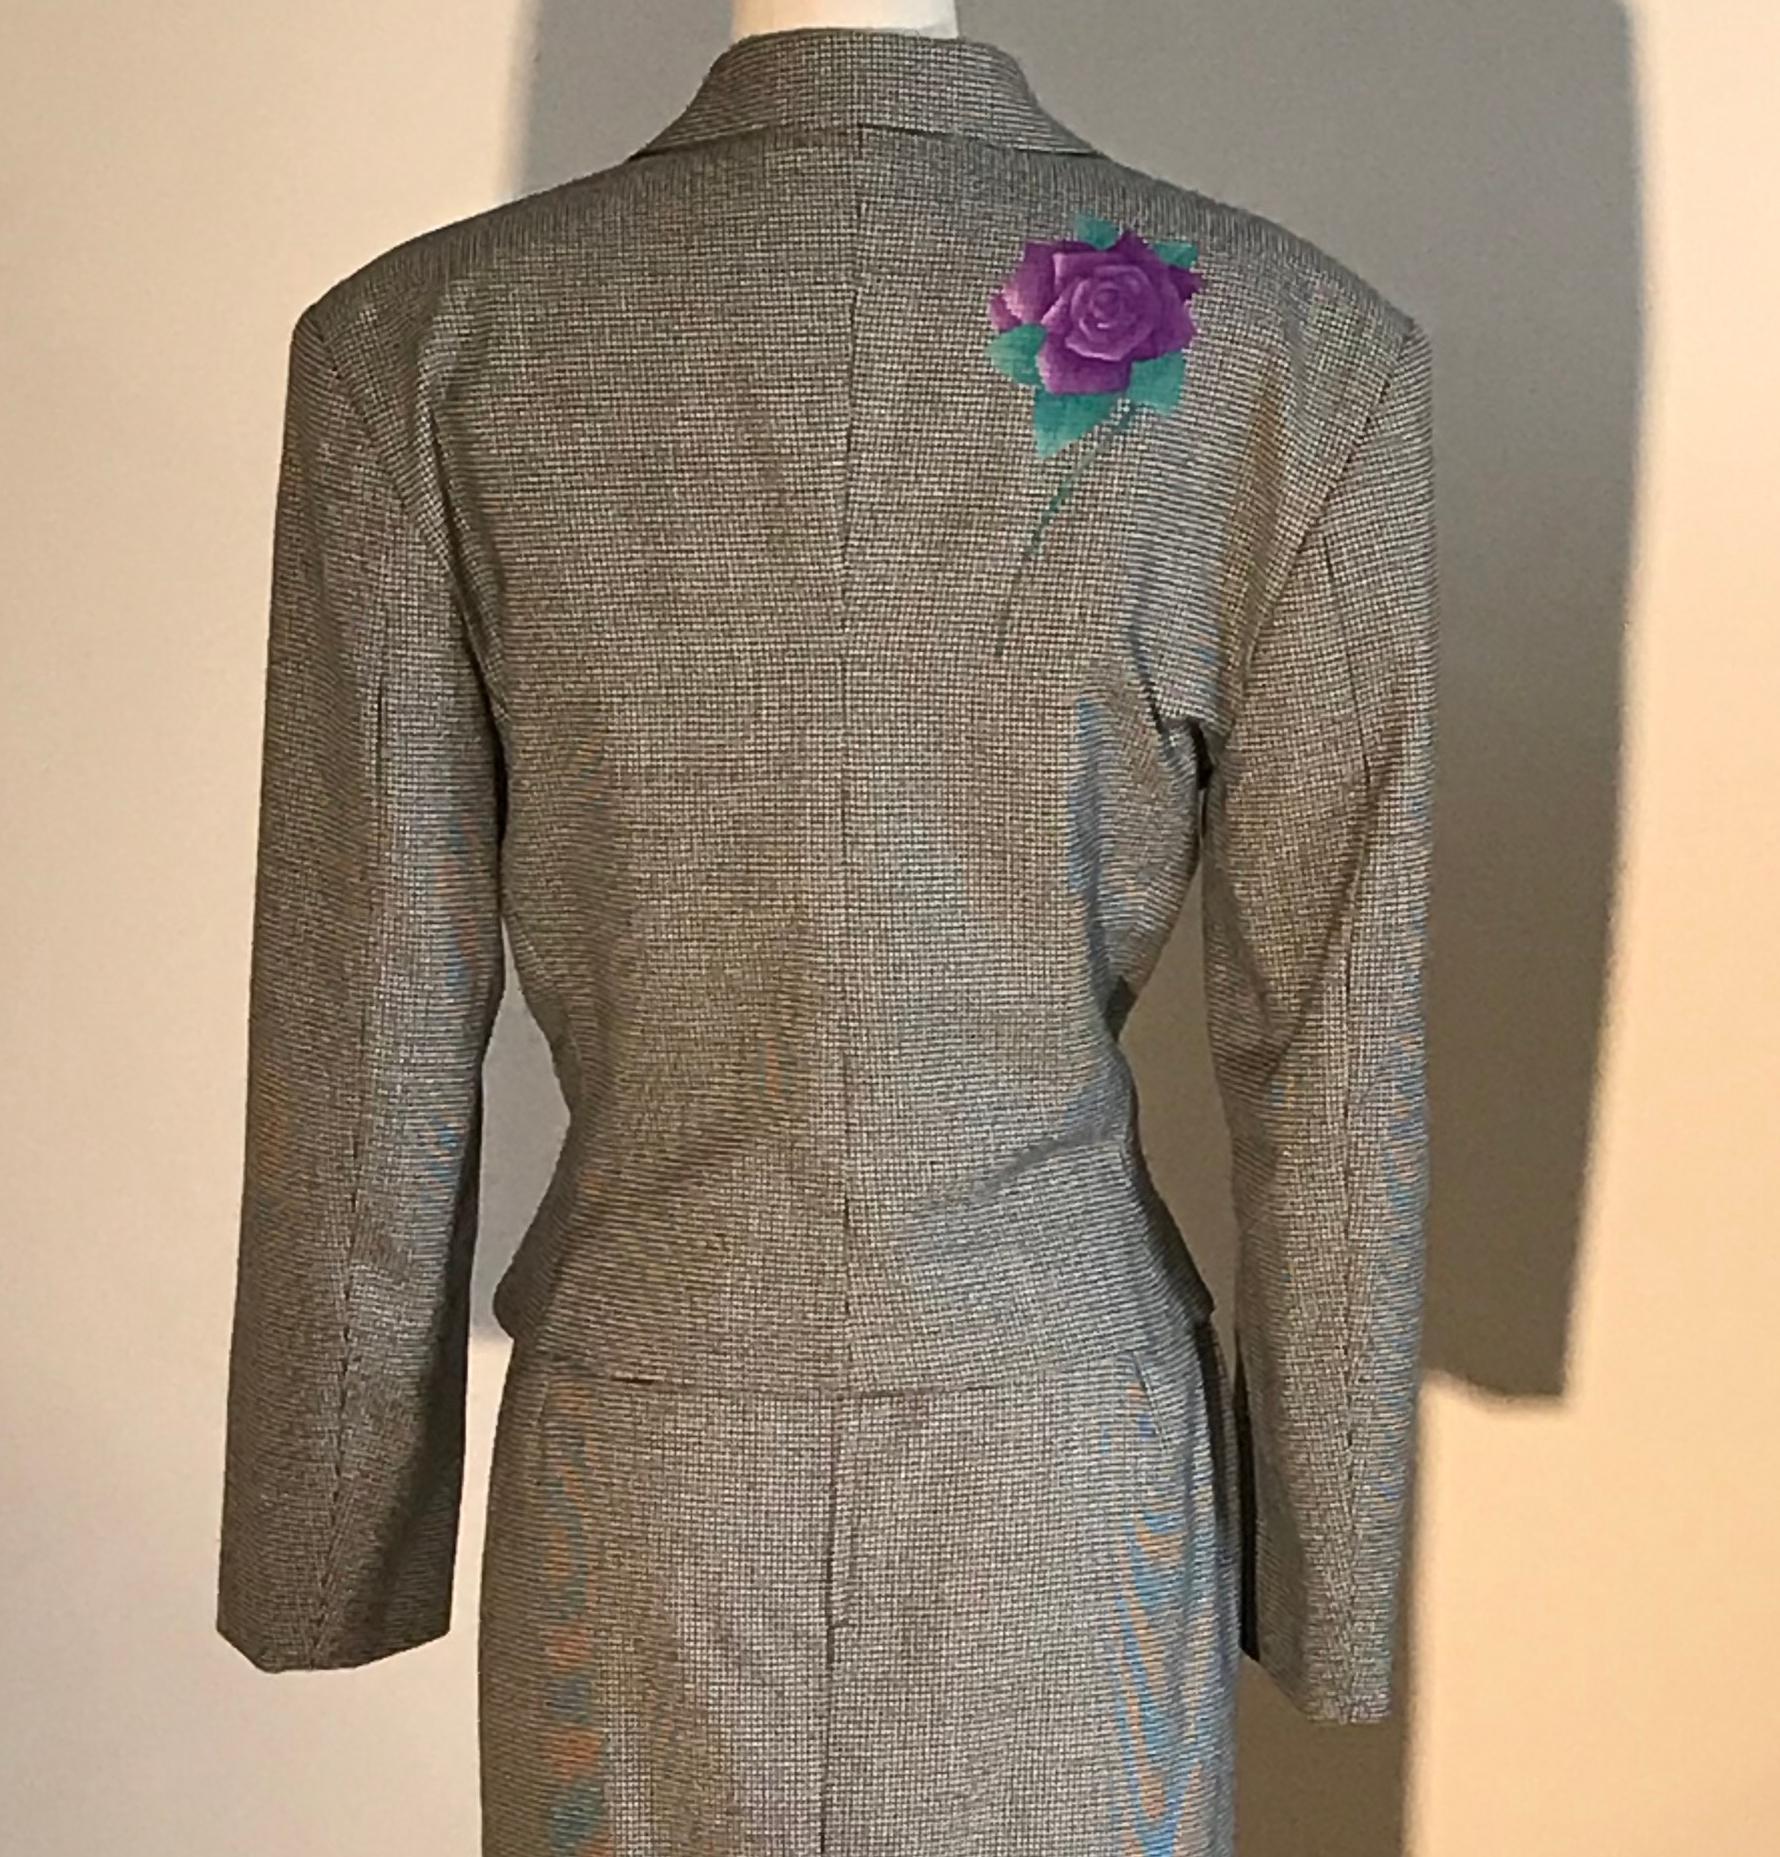 Gianni Versace vintage wool blazer in black and white houndstooth or dogtooth check. Purple and green roses printed at jacket bust, one sleeve, and back. Jacket features purple Versace logo buttons with rhinestone detail. Medium padding at